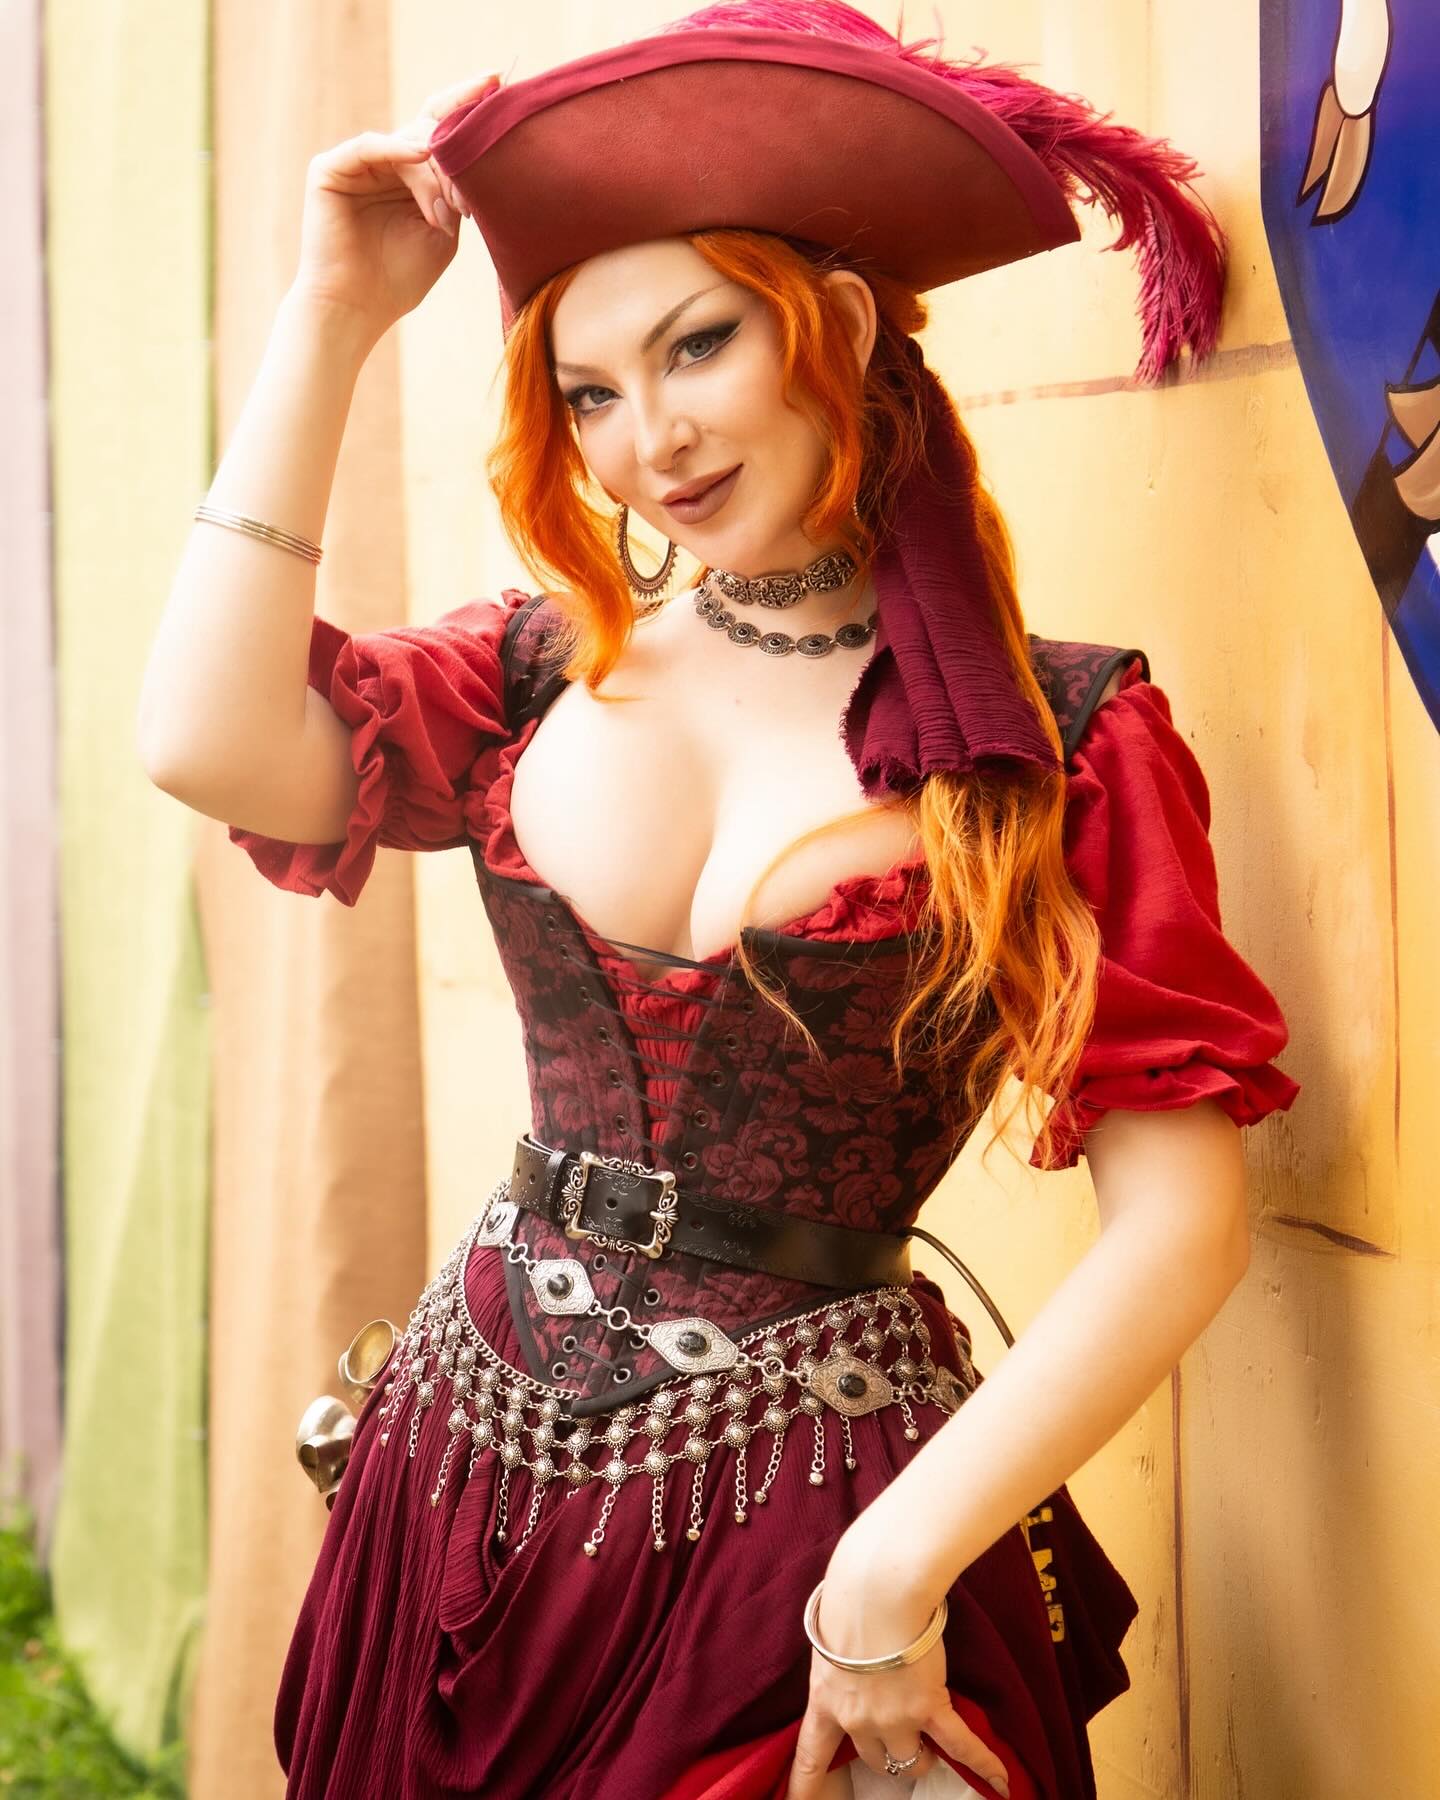 We wants the RedHead!

Pirate weekend at @renaissancepleasurefaire was fun but wet! It rained most of the day each day but it was still a delight splashing around with friends and working the Oubliette! Come by this weekend for more drinks down your throats me hearties!

Photos by @happytriggerla 
Cosplay garb made by me 

#redhead #pirate #renfaire